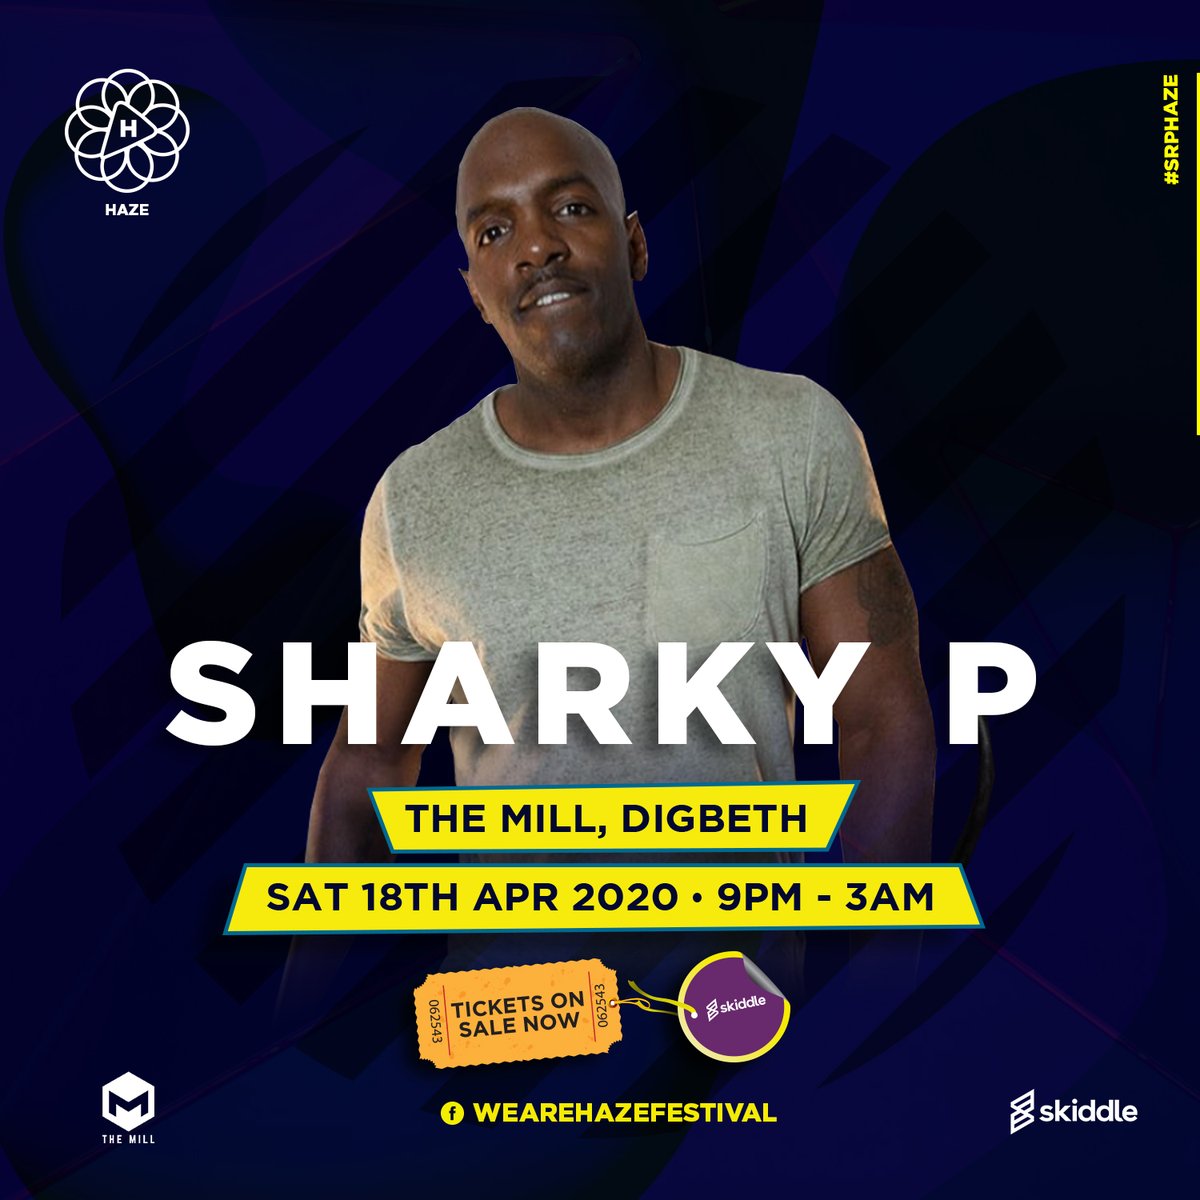 #HAZE2020 welcomes UKG legends @DJPiedPiper & @McSharky_P to our event on Sat 18th Apr at @TheMillDigbeth. Get your tickets 👉 bit.ly/haze-18th-apri…